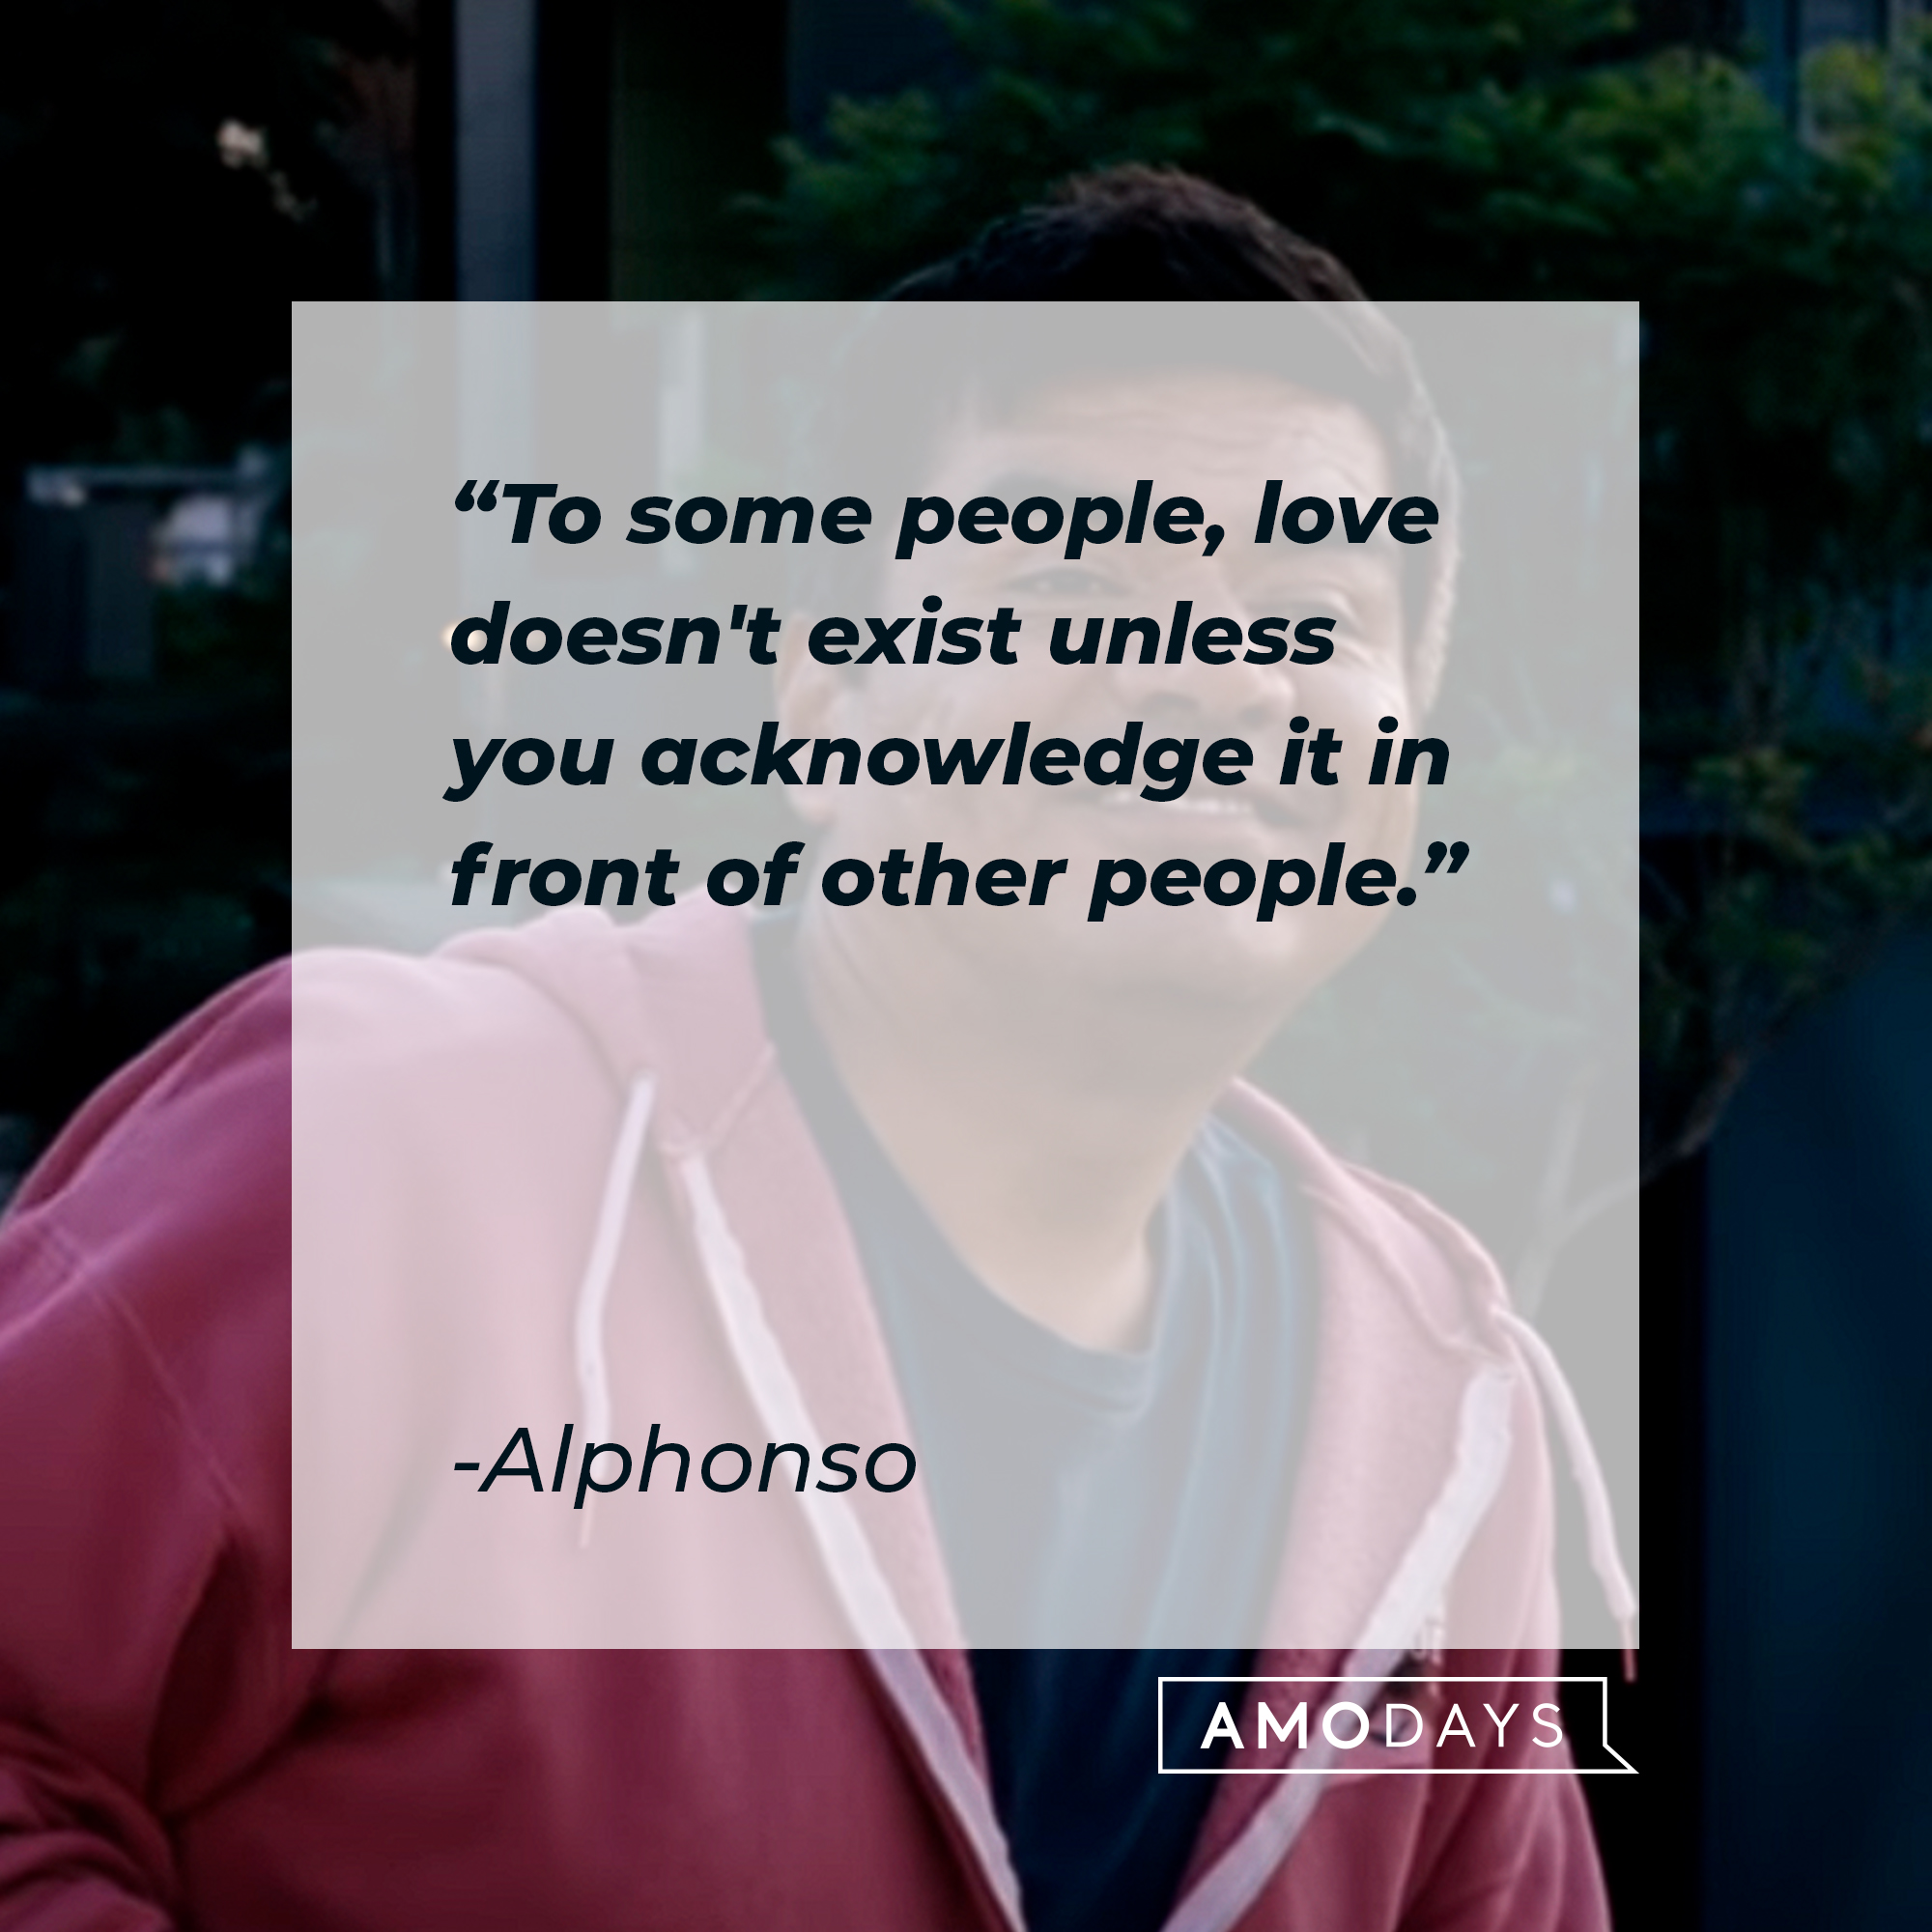 Alphonso's quote: " To some people, love doesn't exist unless you acknowledge it in front of other people" | Source: Youtube.com/WarnerBrosPictures